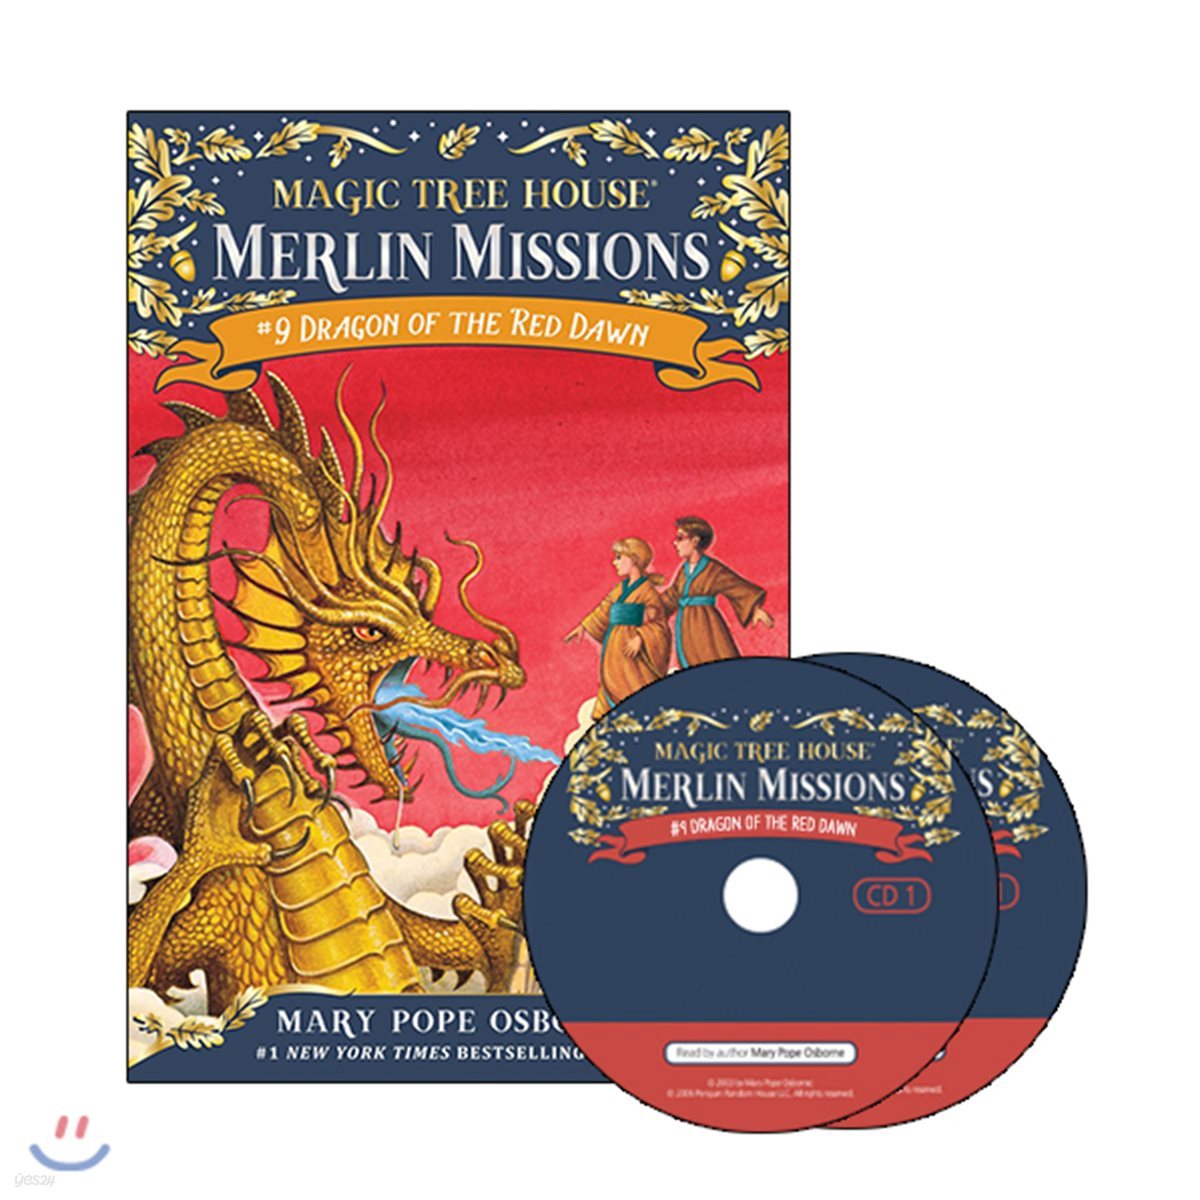 Merlin Mission #9 : Dragon of the Red Dawn (Book + CD)